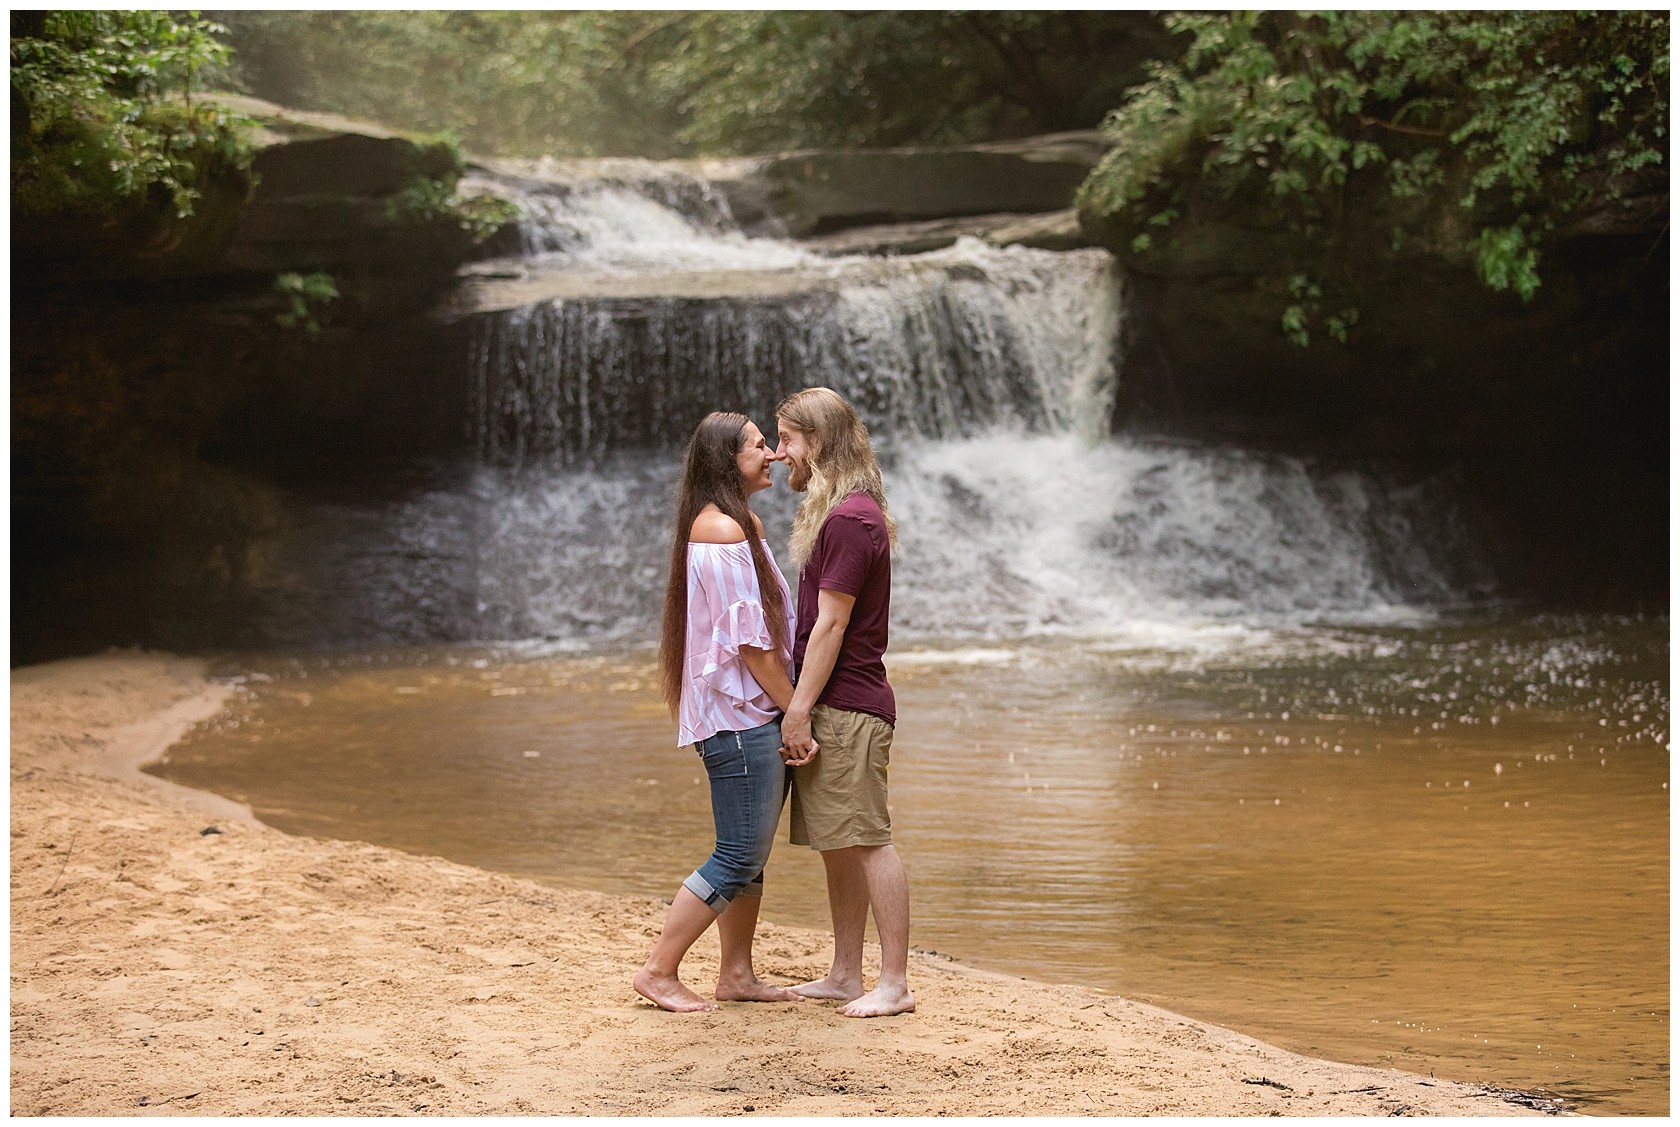 Waterfall Engagement Session in the Red River Gorge on a Cliff by Kentucky Wedding Photographers Kevin and Anna Photography